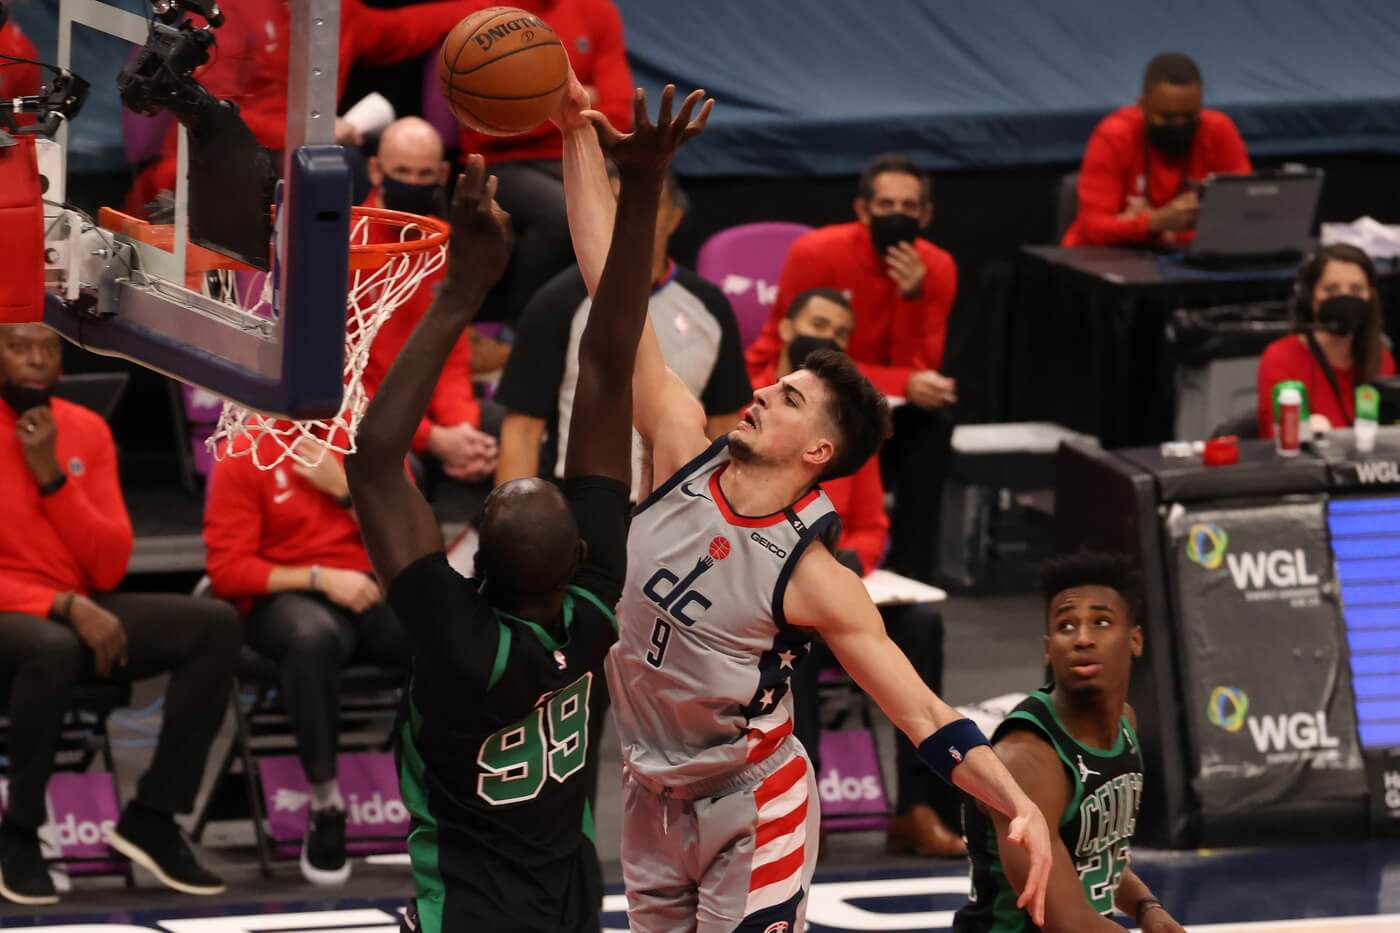 Feb 14, 2021; Washington, District of Columbia, USA; Washington Wizards forward Deni Avdija (9) is fouled while attempting to dunk the ball by Boston Celtics center Tacko Fall (99) in the fourth quarter at Capital One Arena. Mandatory Credit: Geoff Burke-USA TODAY Sports